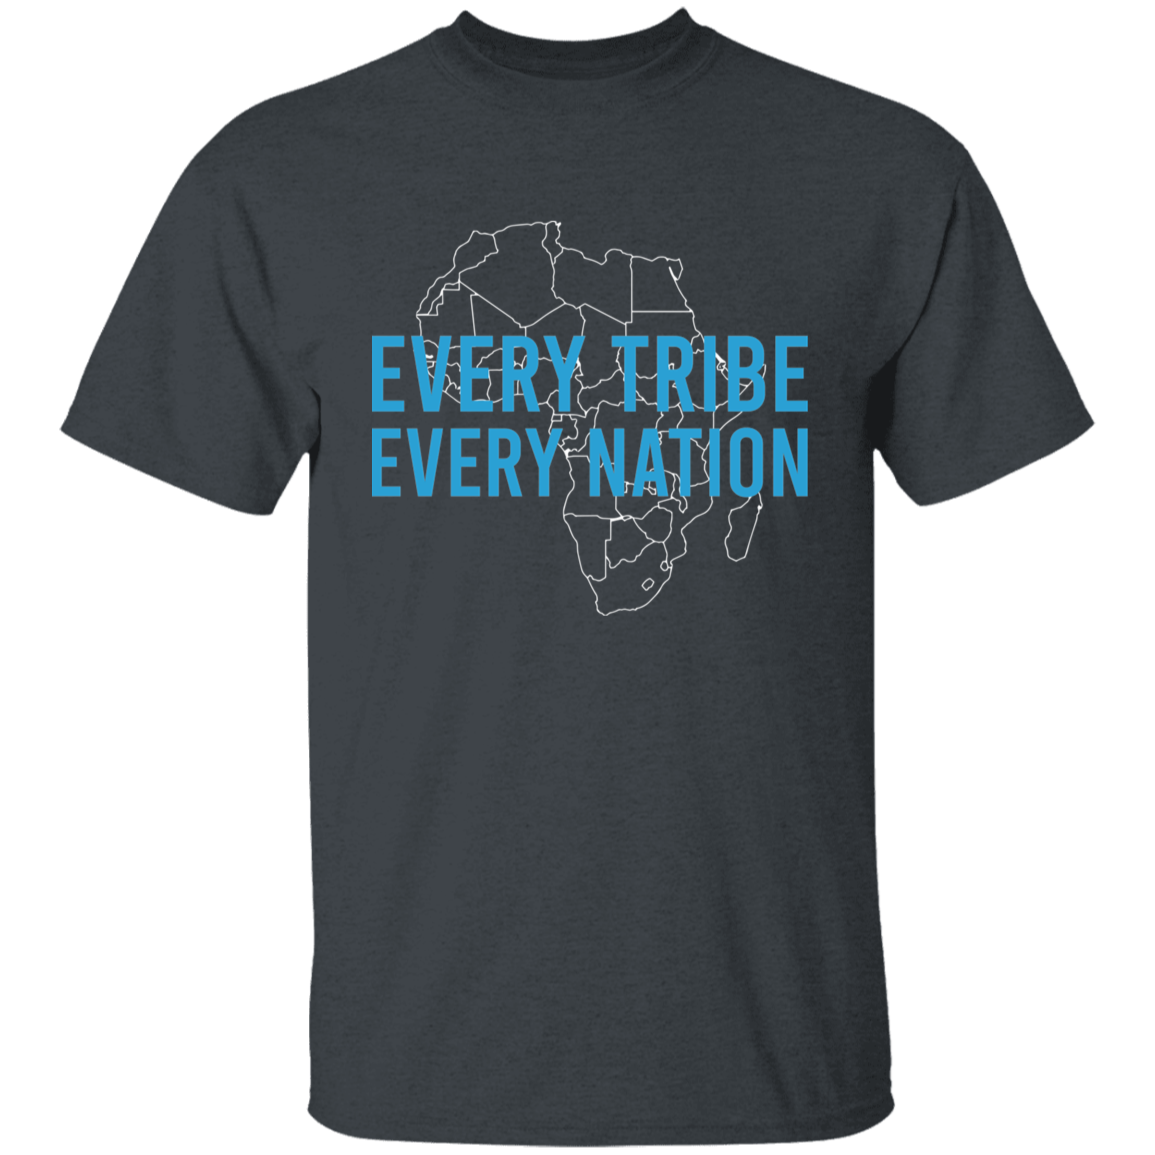 YOUTH - Every Tribe - Classic T-Shirt